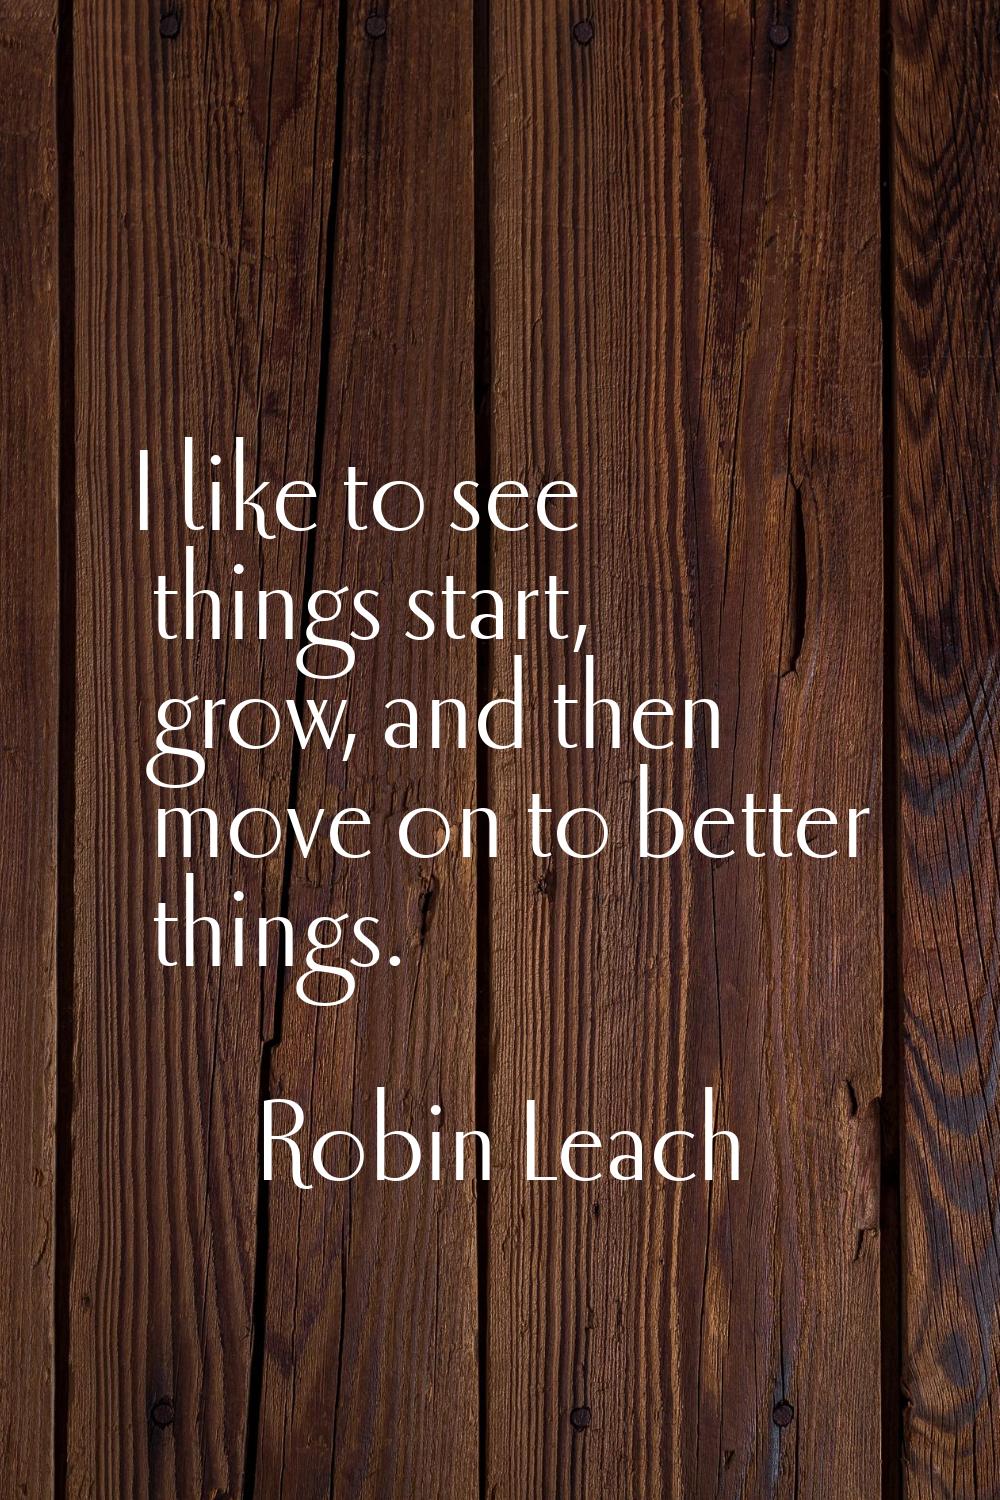 I like to see things start, grow, and then move on to better things.